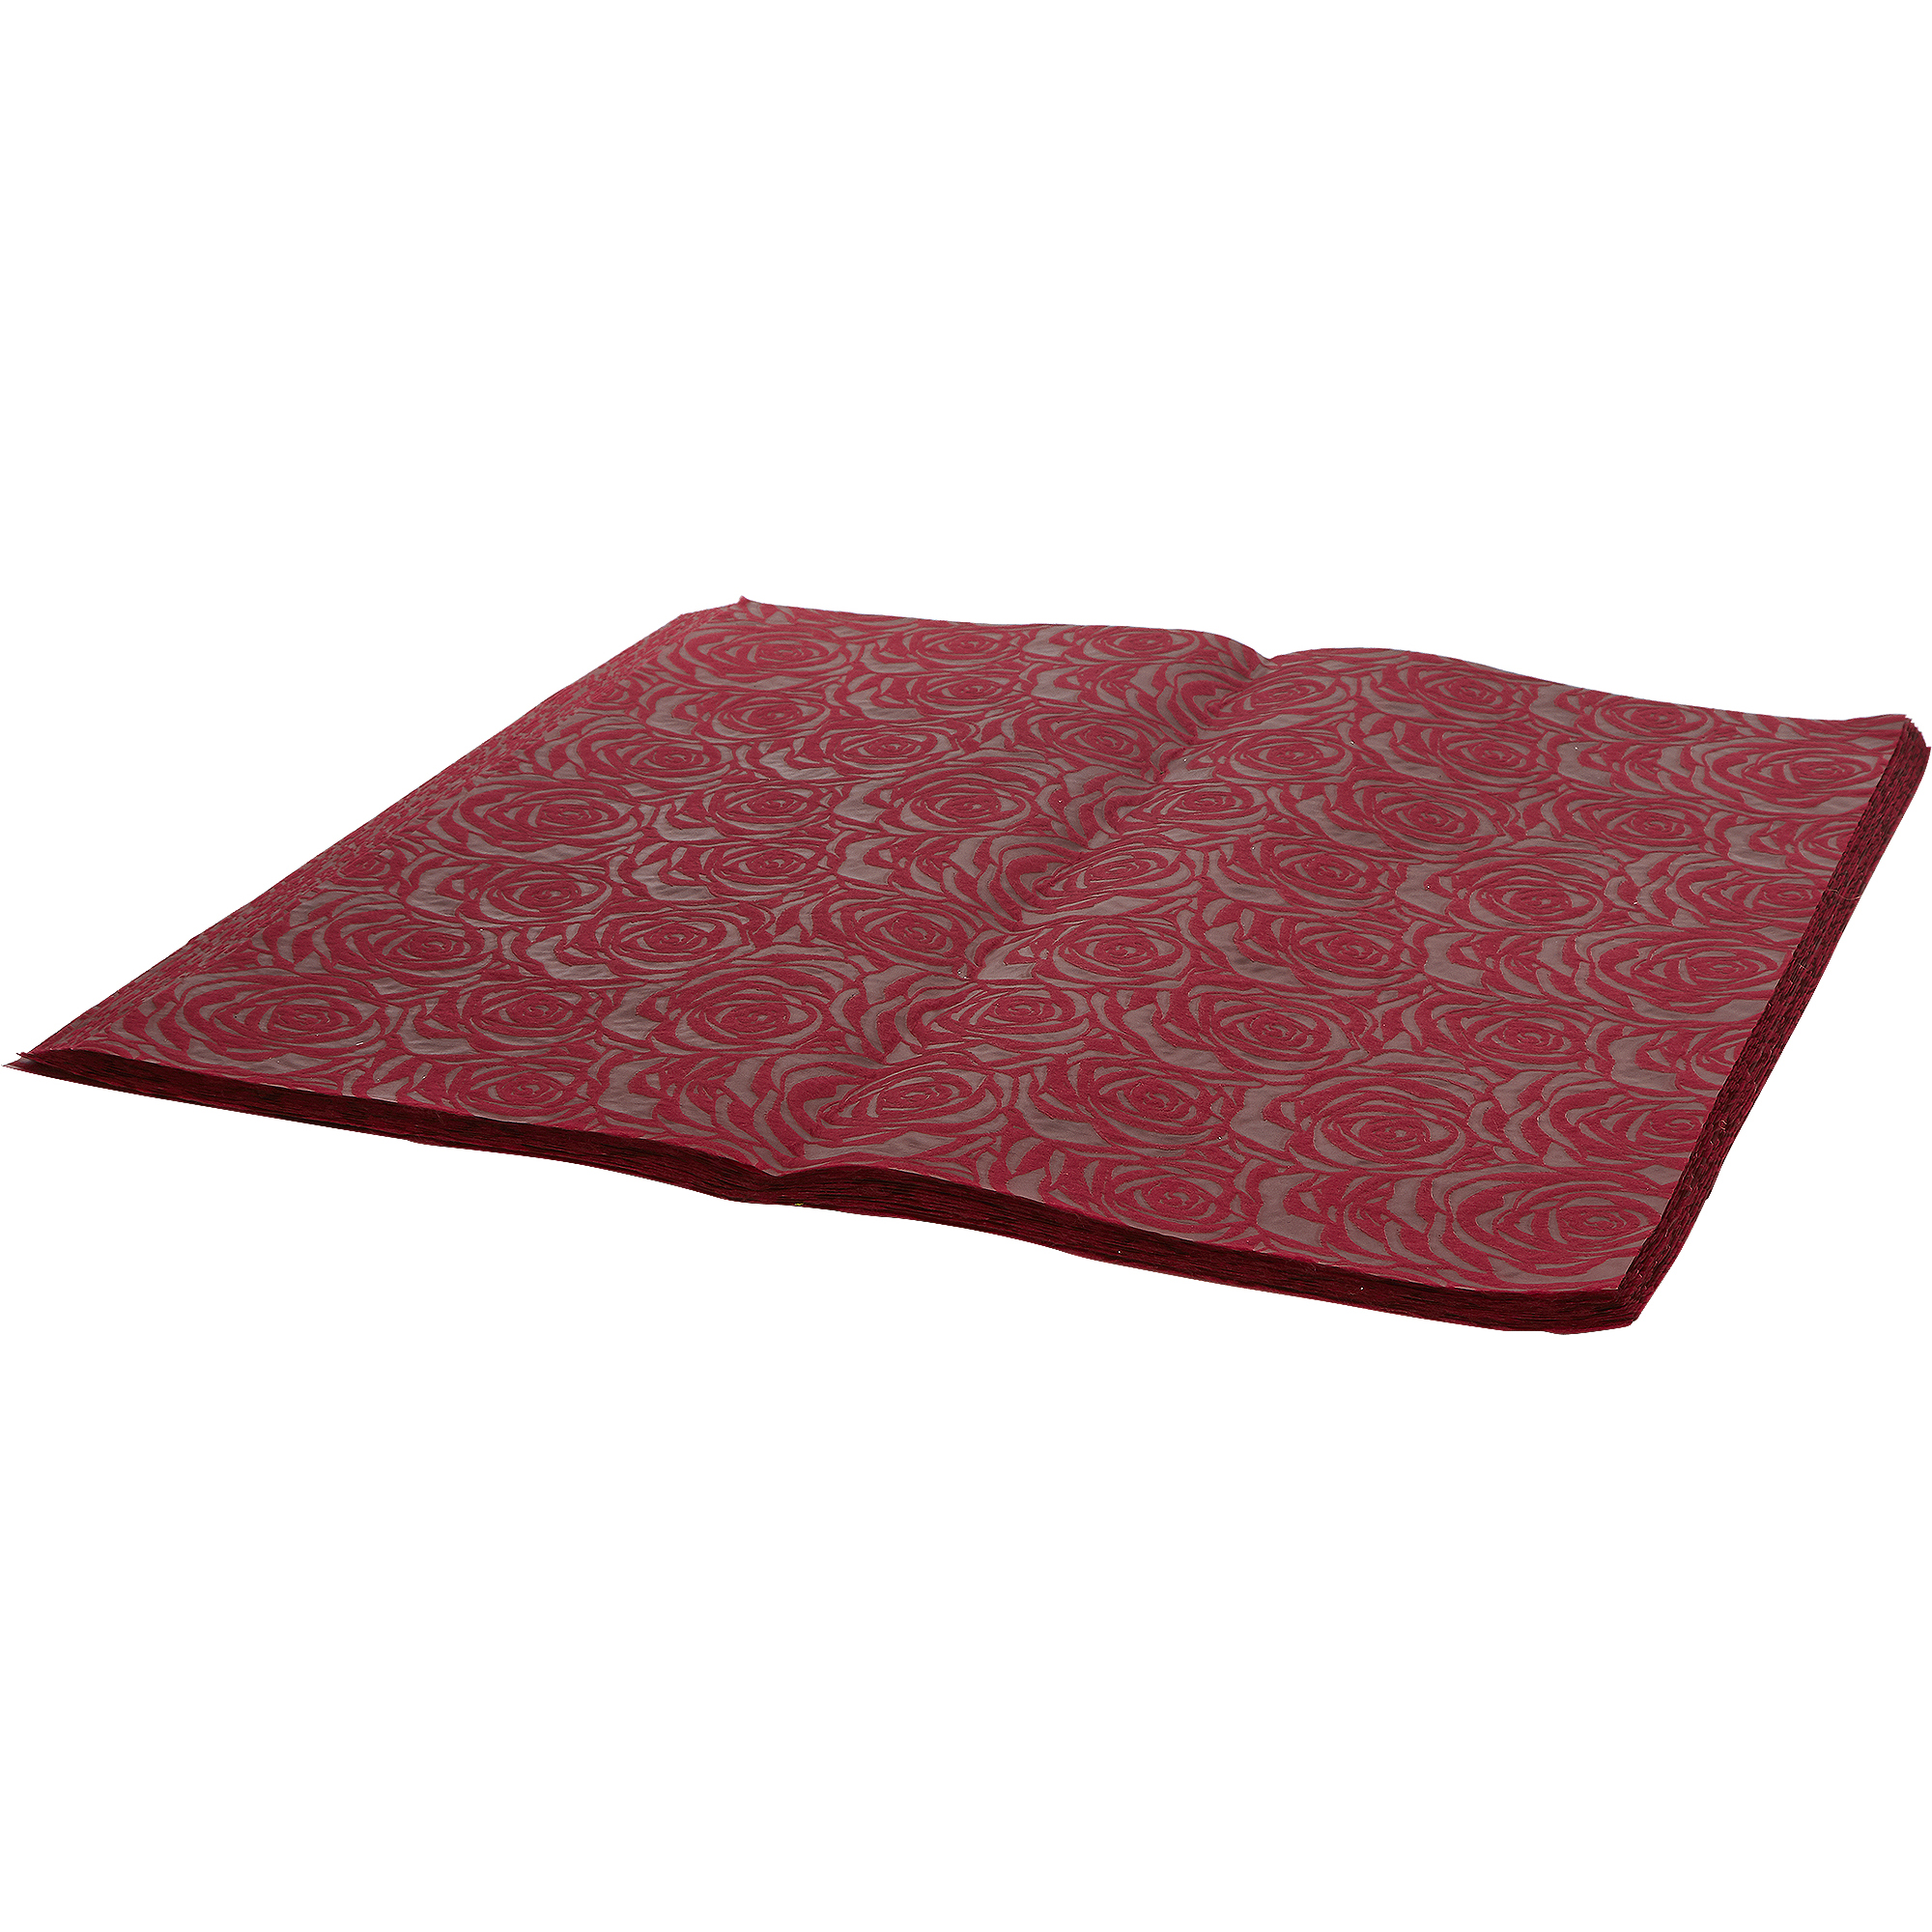 Embossed Nonwoven Floral Wrapping Paper 20pc/bag 21" x 22" - Burgundy